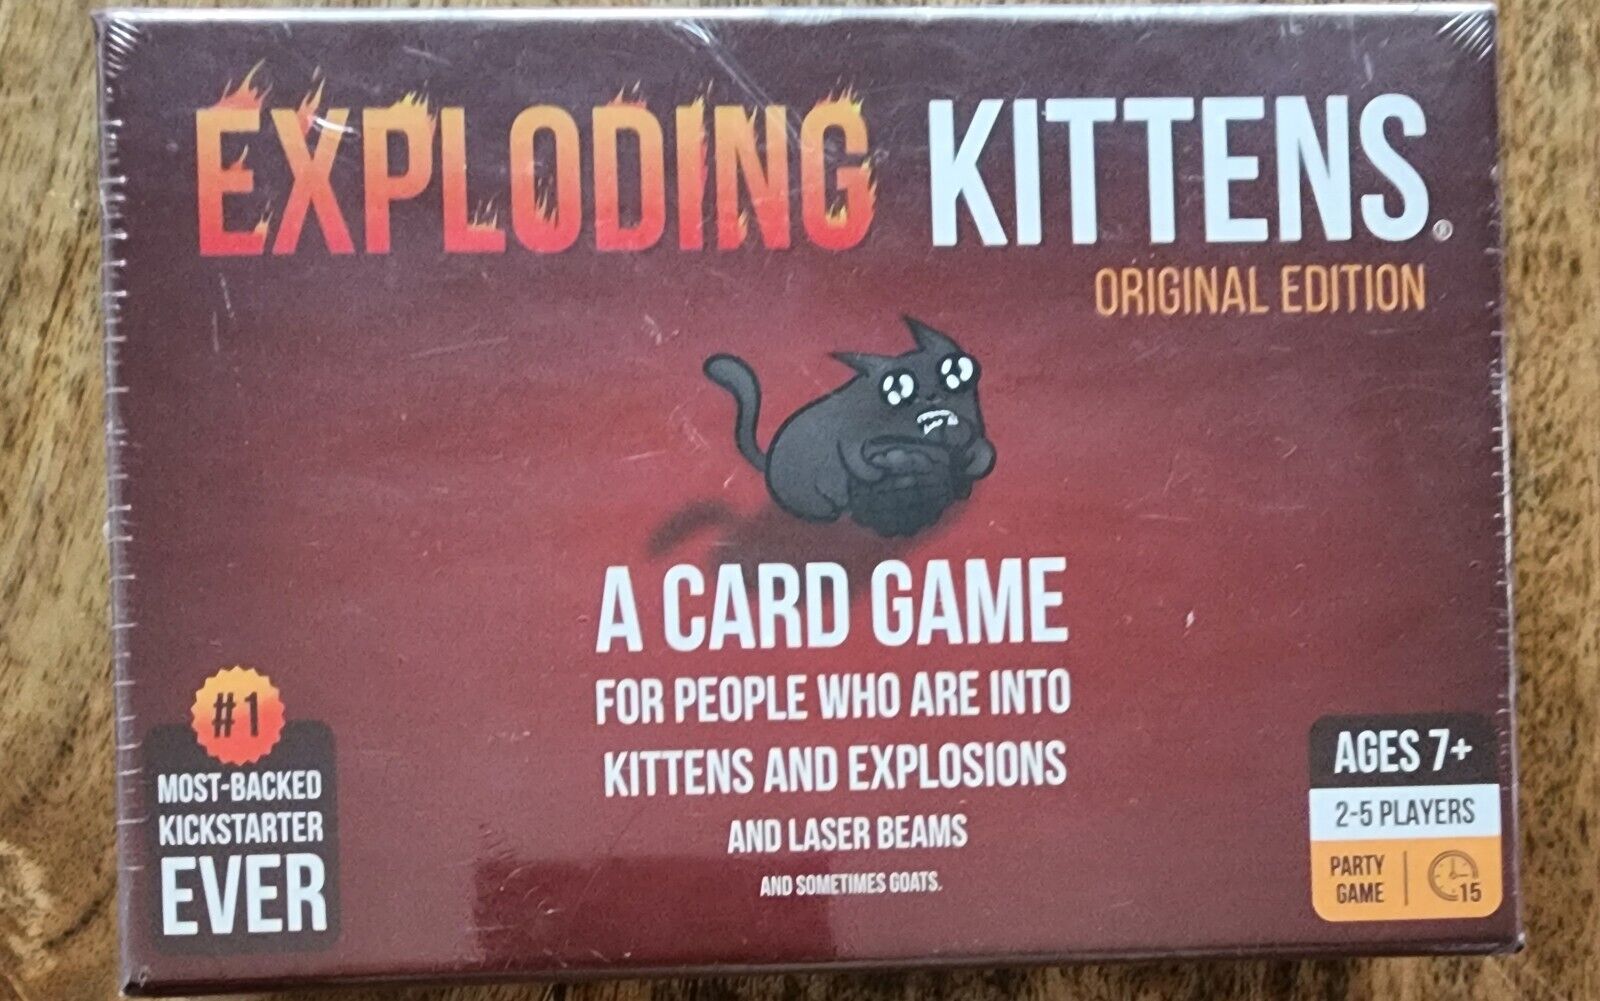 *NEW* The Original Exploding Kittens Card Game | Family Friendly Party Game